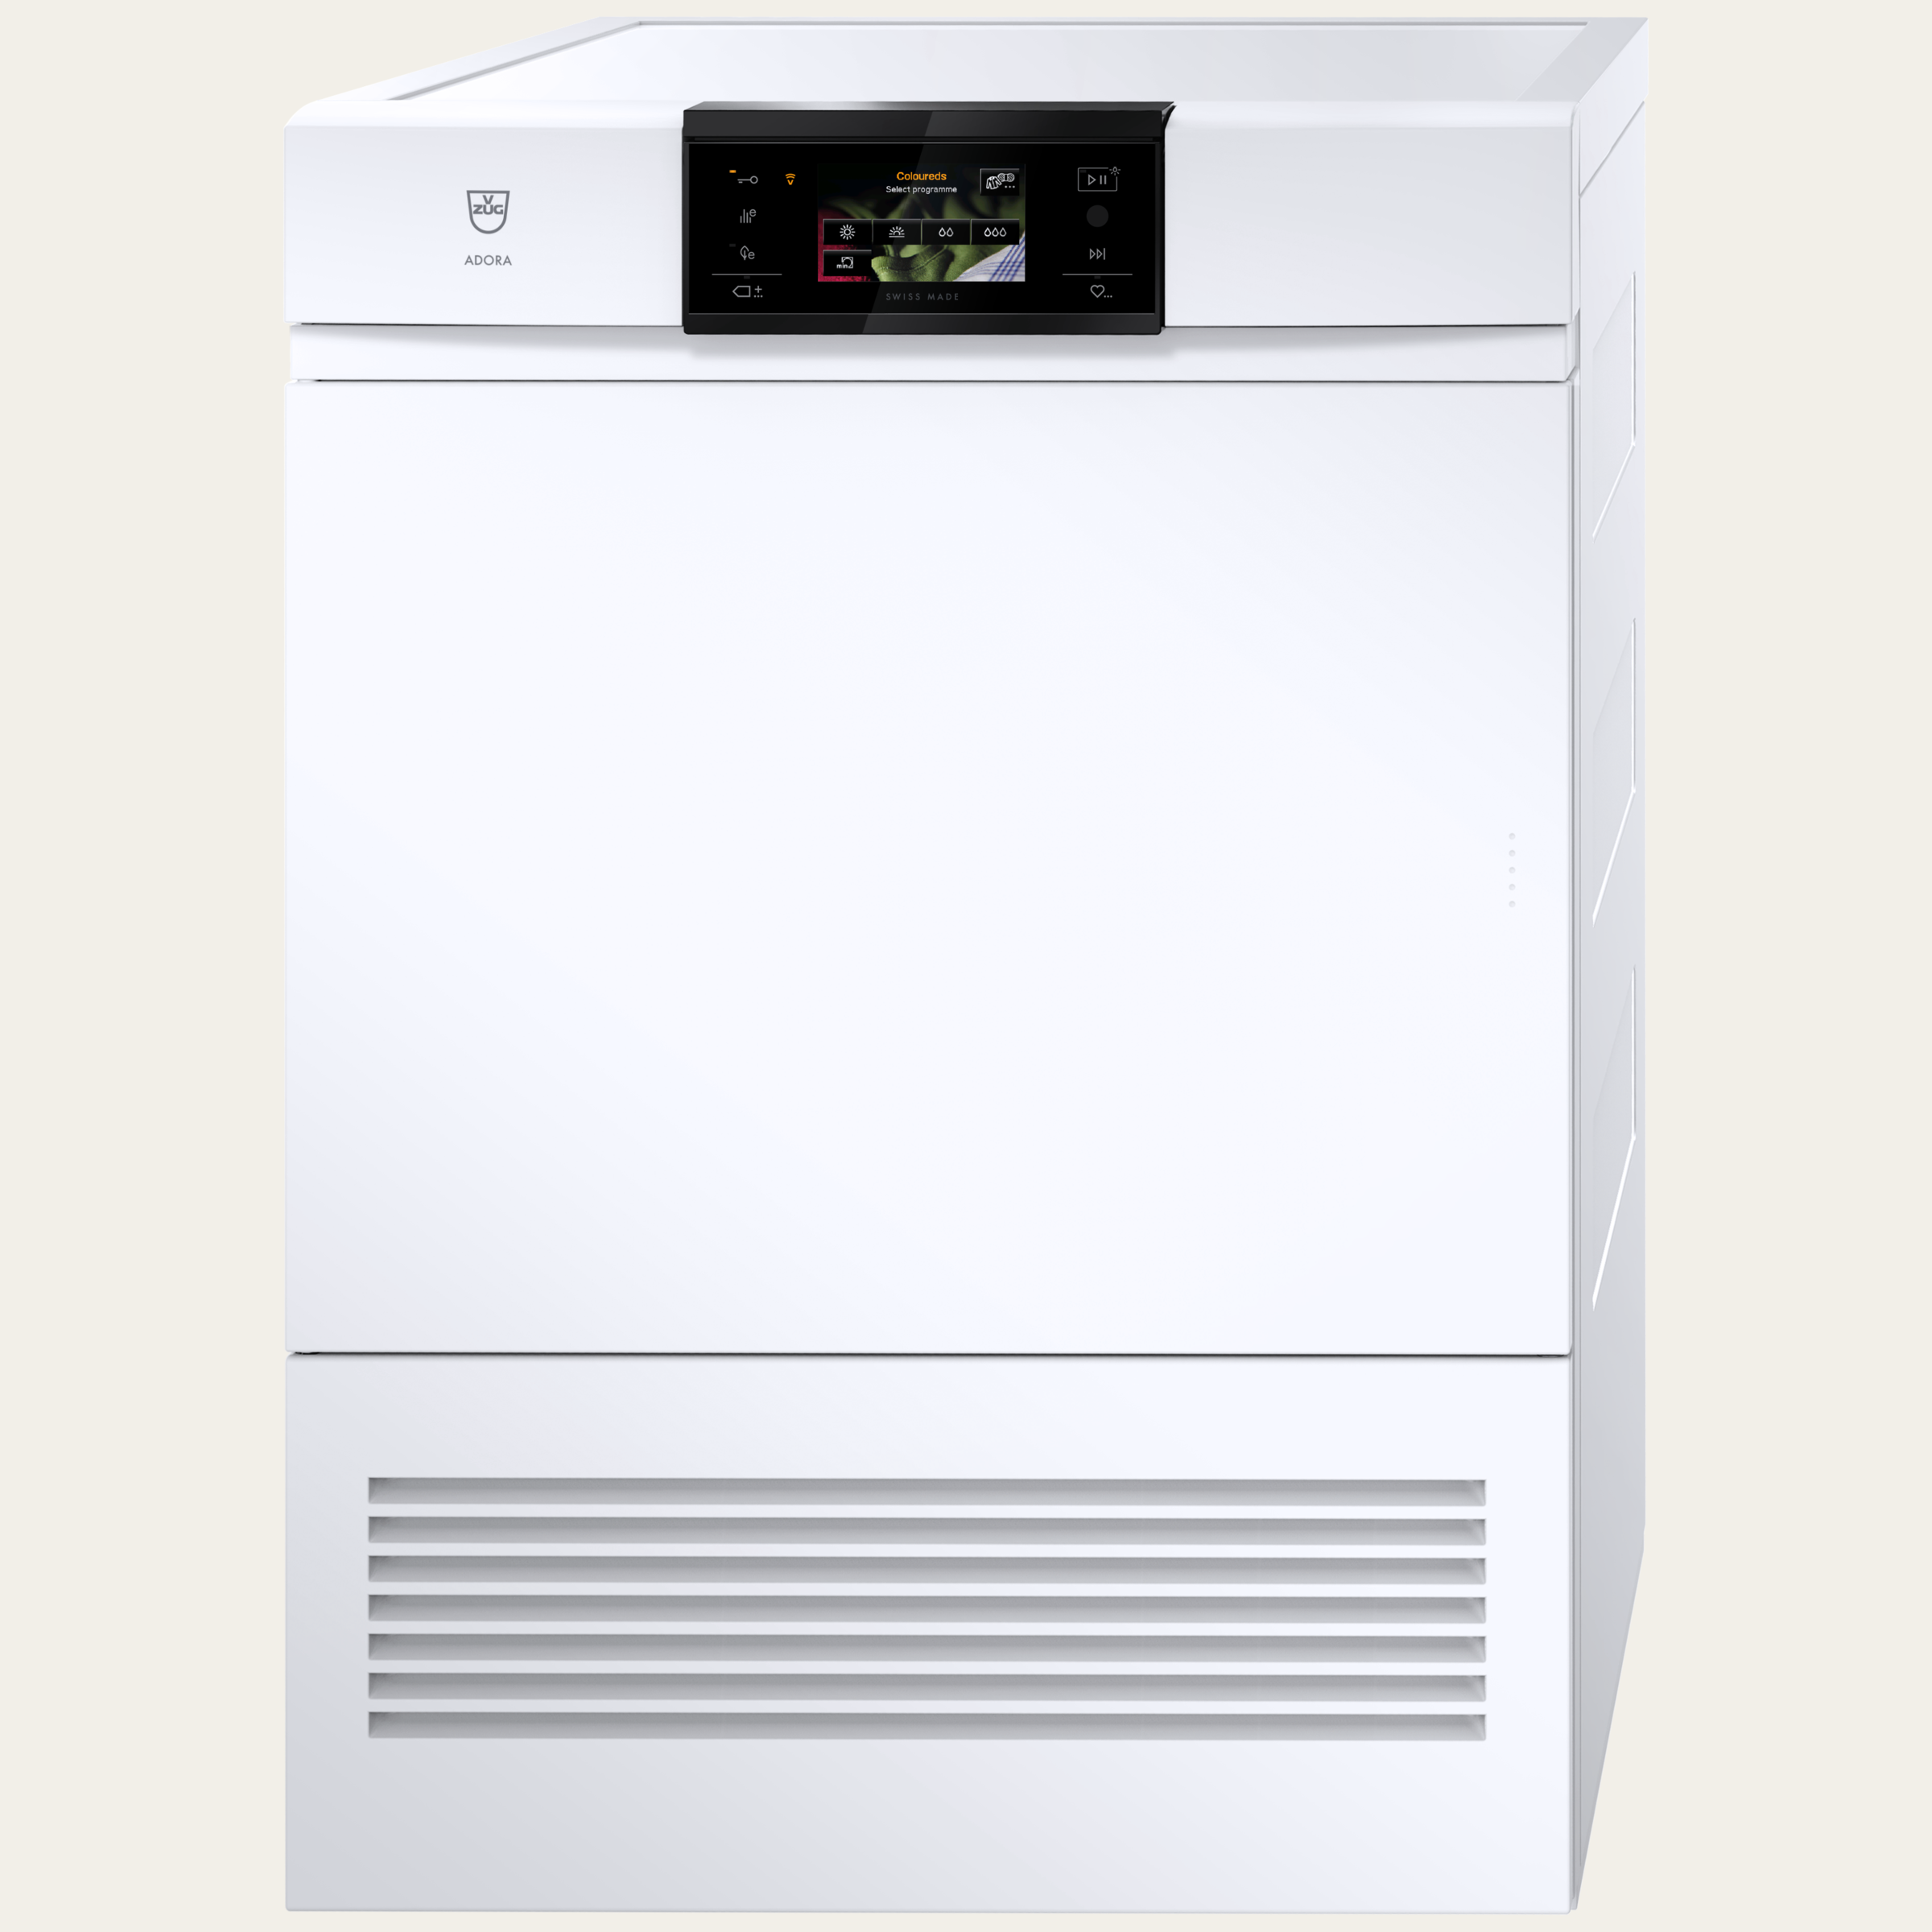 V-ZUG Tumble dryer AdoraDry V4000, Door hinge: Left,V-ZUG-Home, Nominal capacity: 7 kg, Full-colour graphic display, Air transport according to UN 3358 prohibited